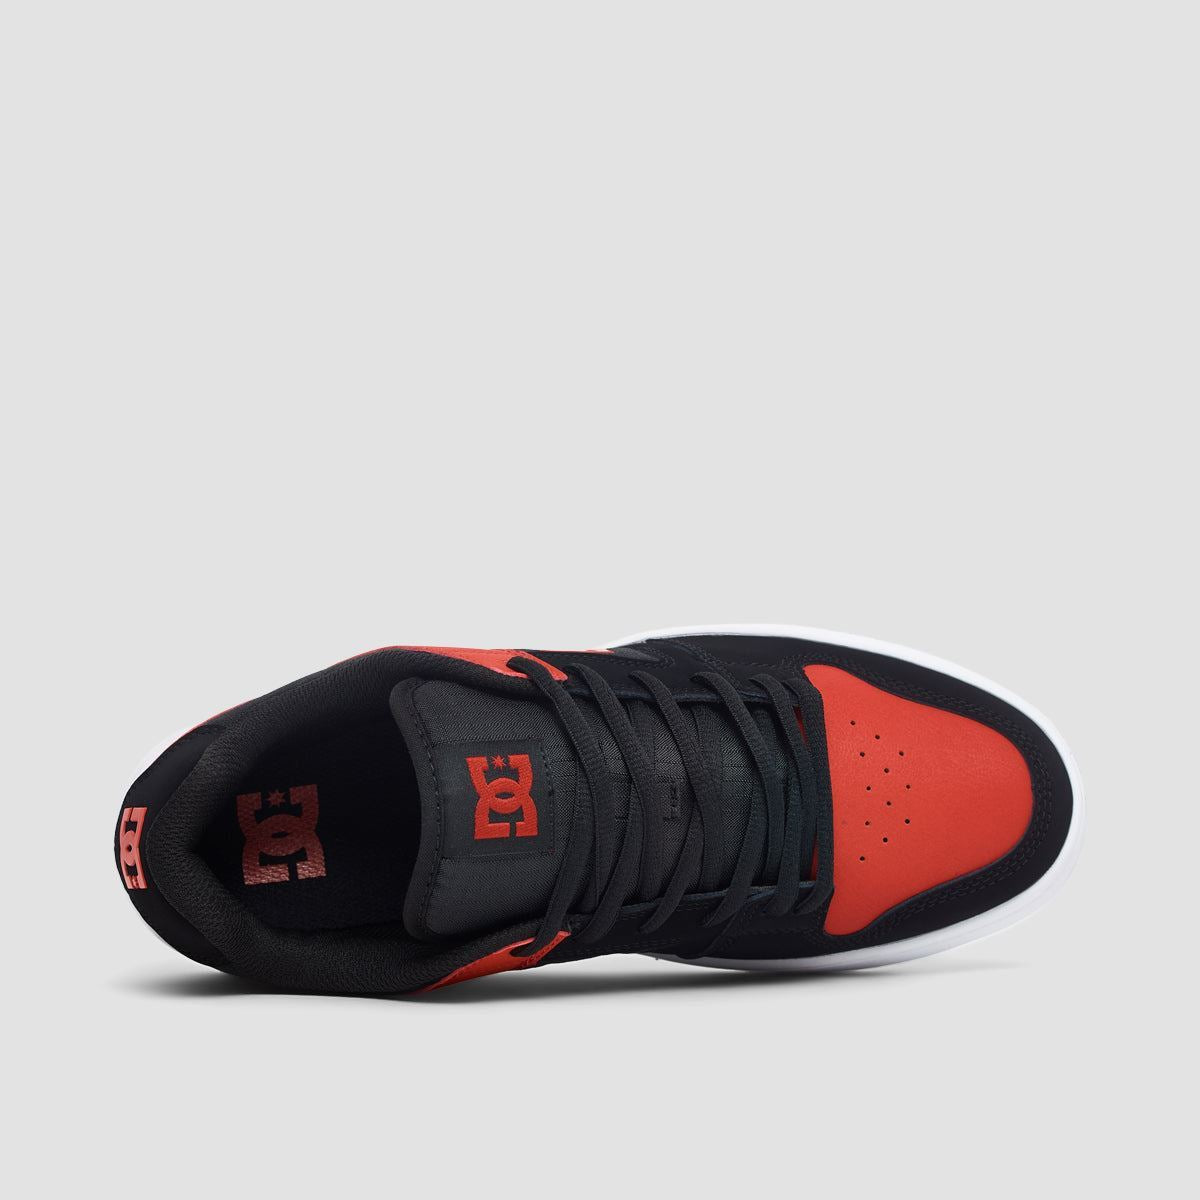 DC Manteca 4 Shoes - Black/Athletic Red